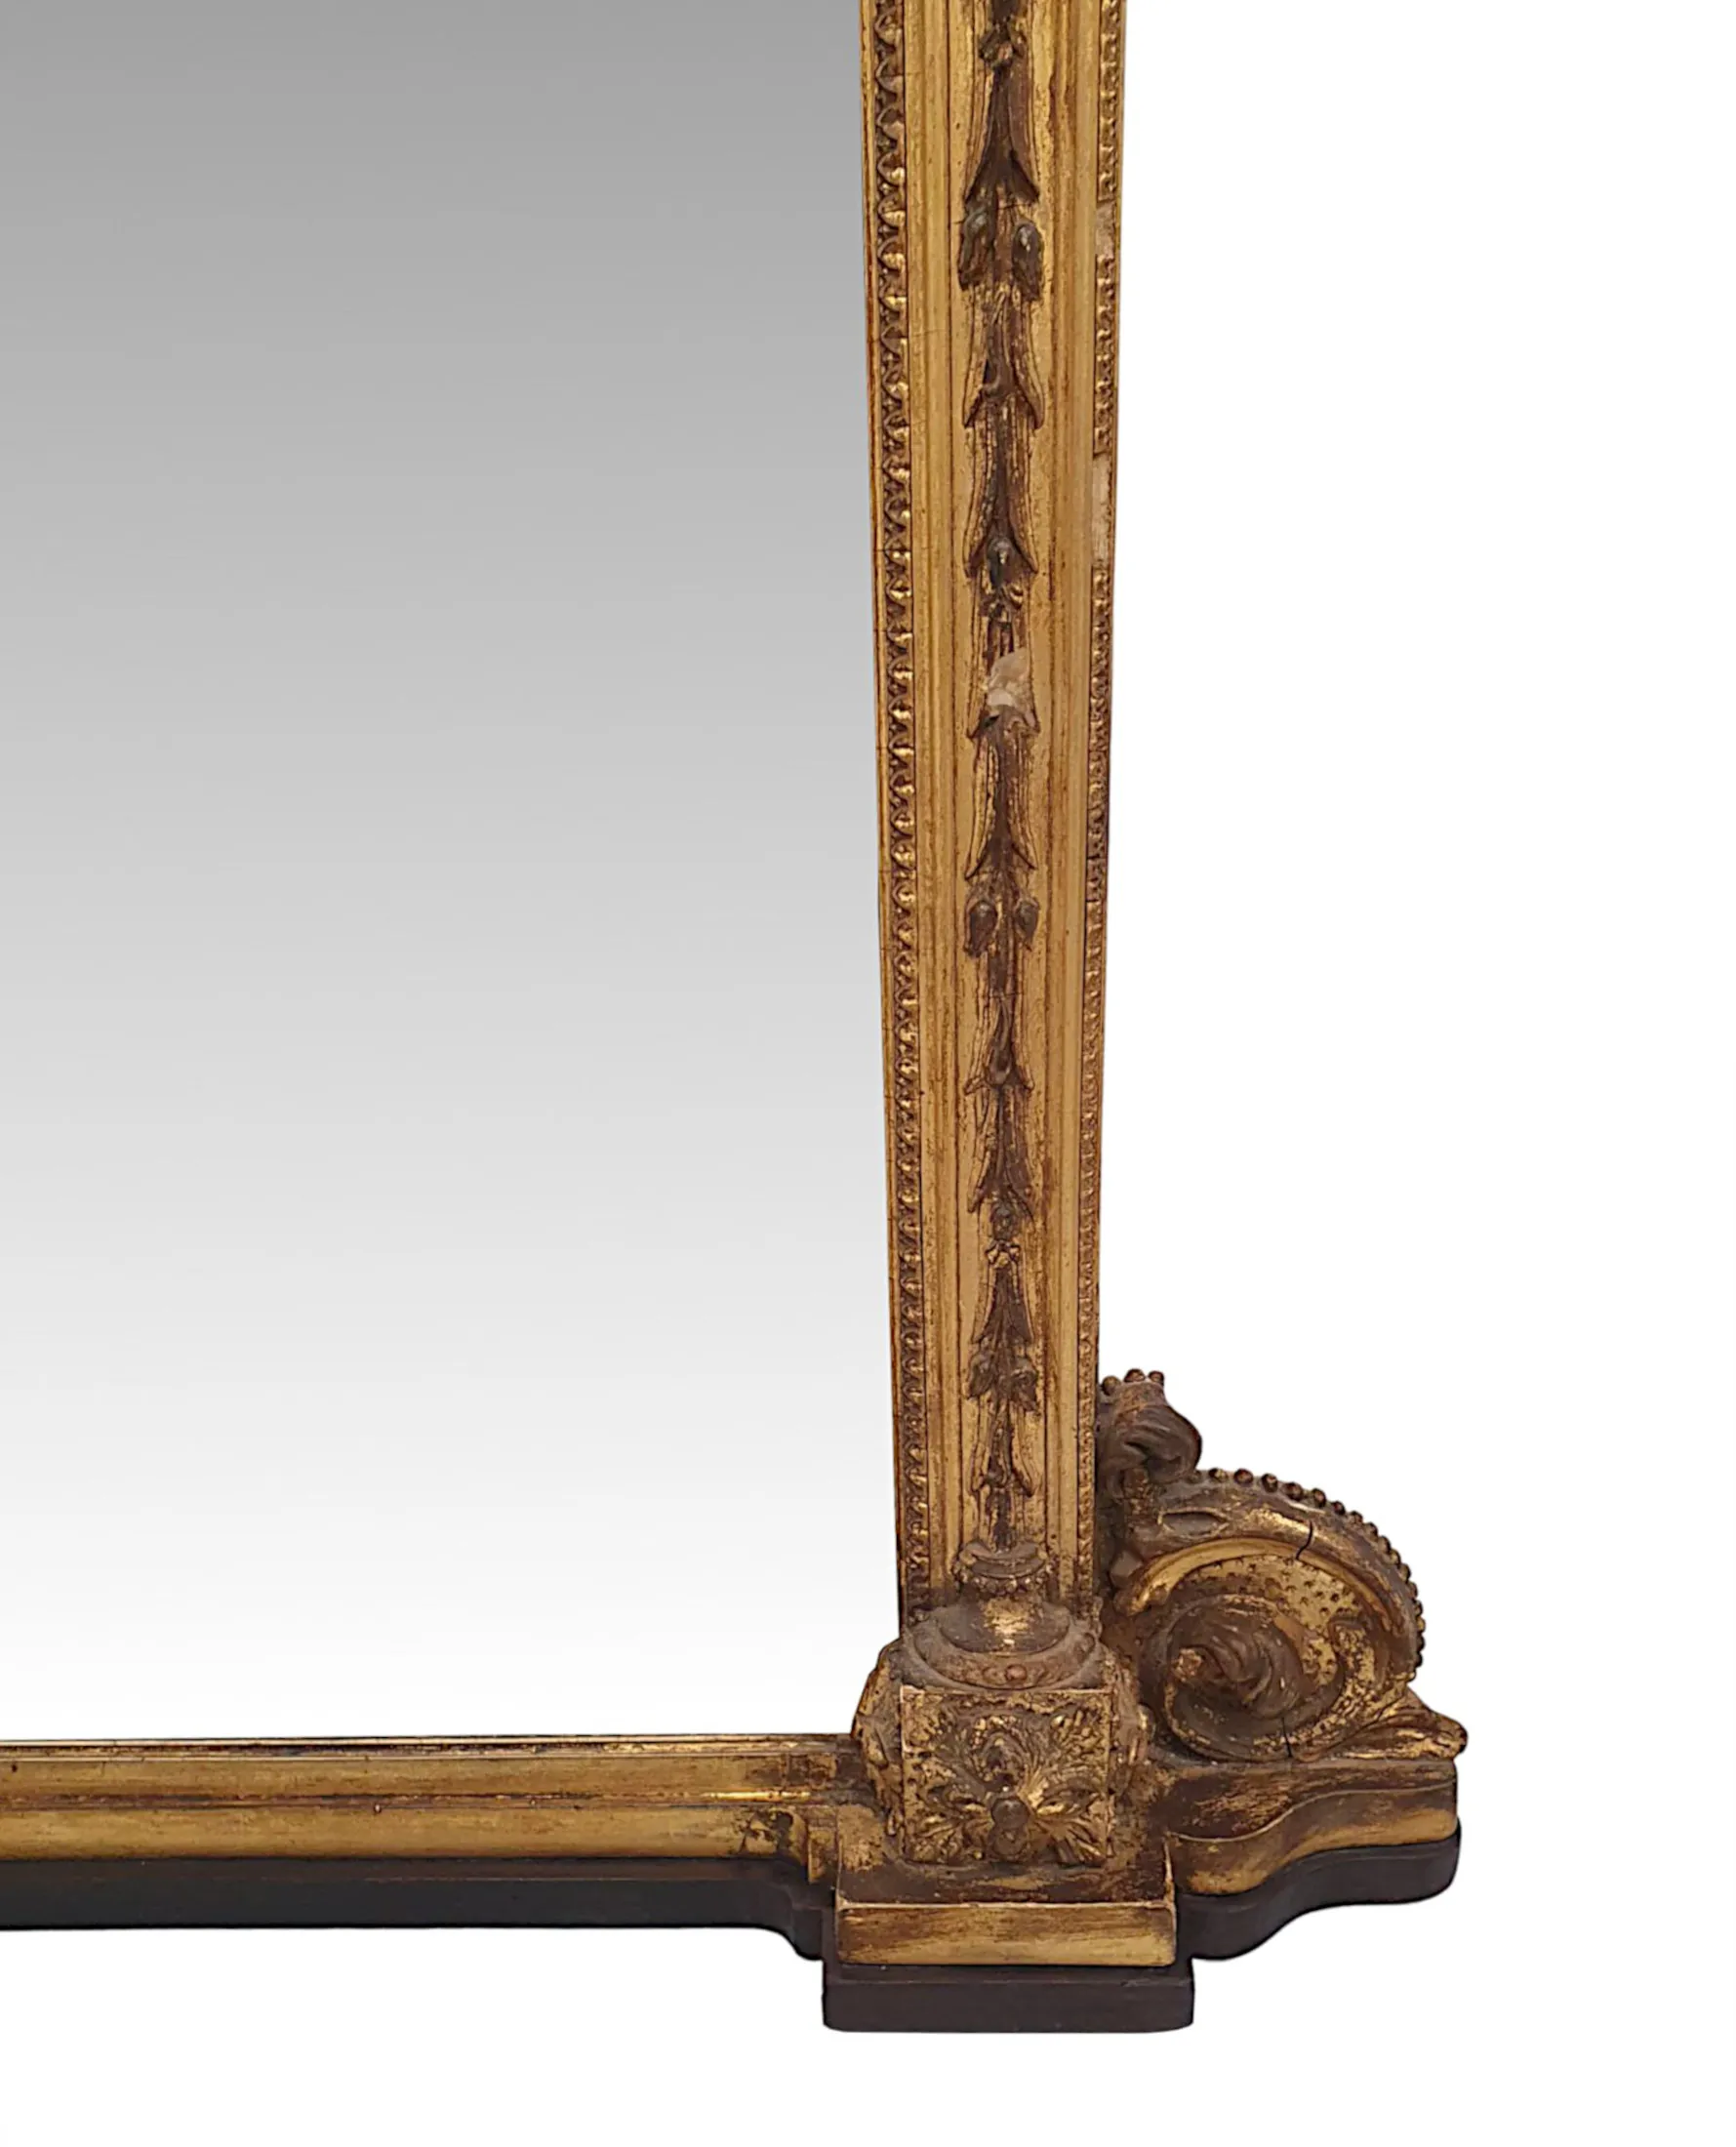  A Fabulous 19th Century Giltwood Pier or Dressing Mirror